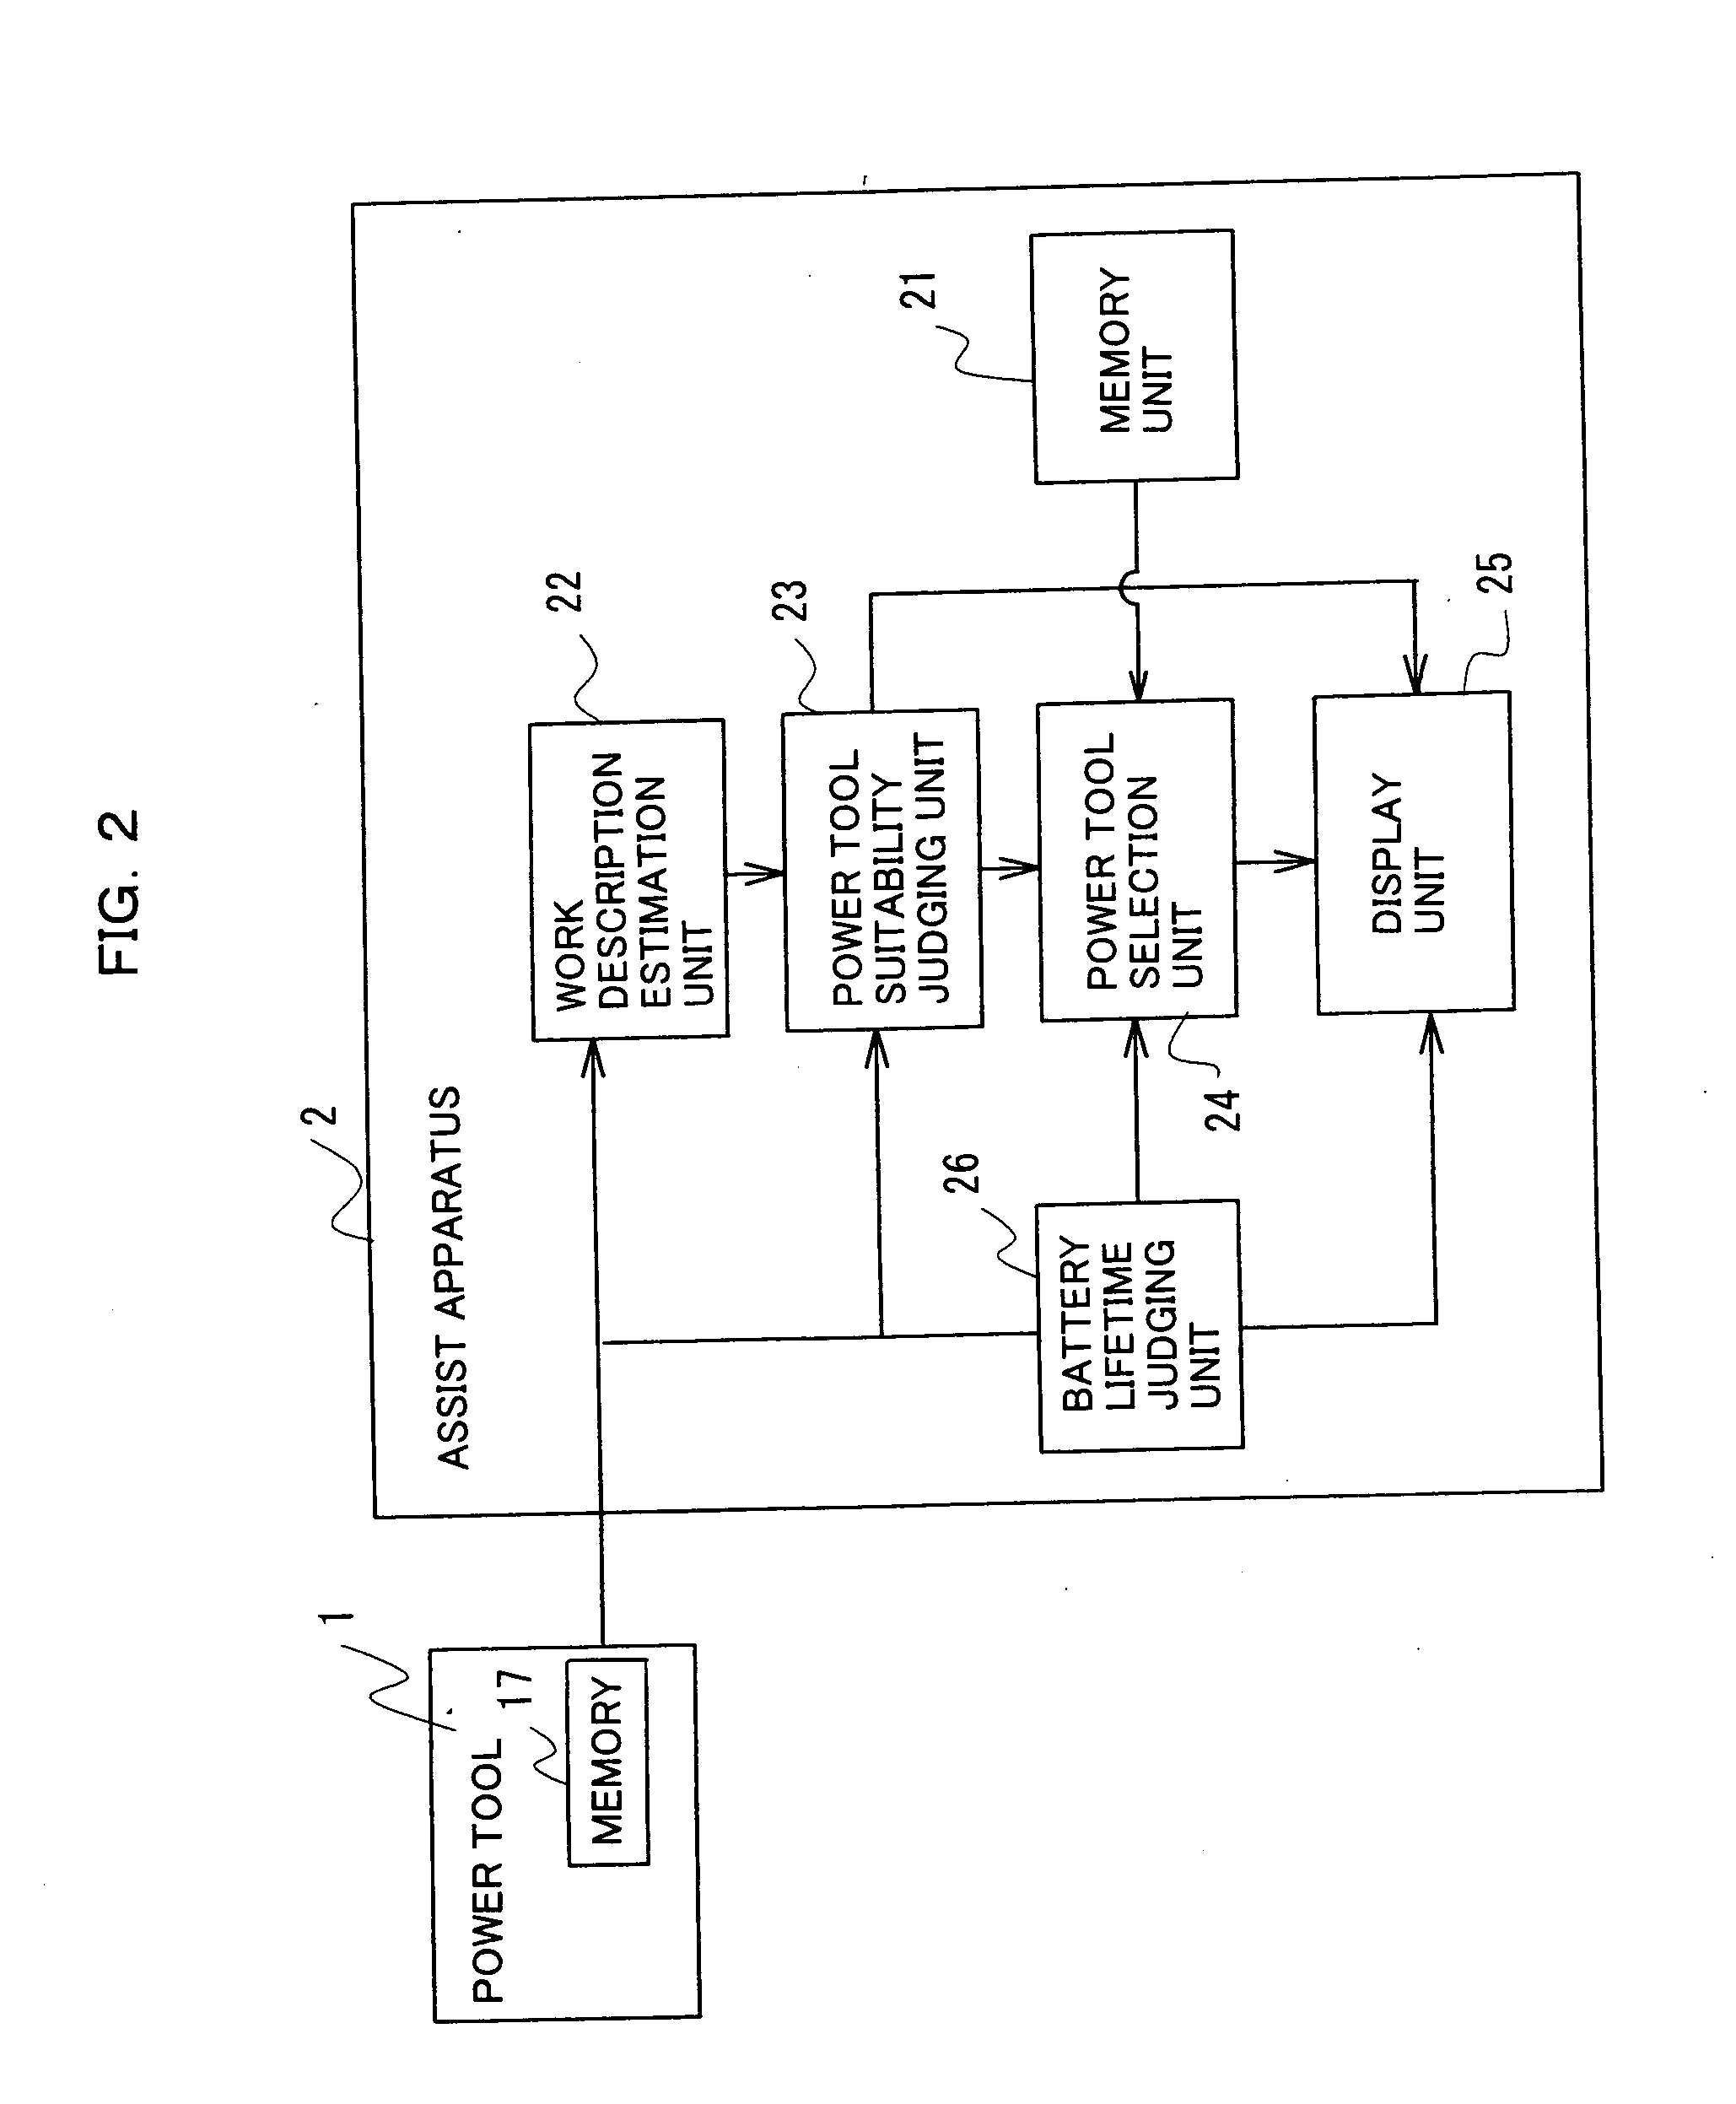 System for assisting selection of power tool